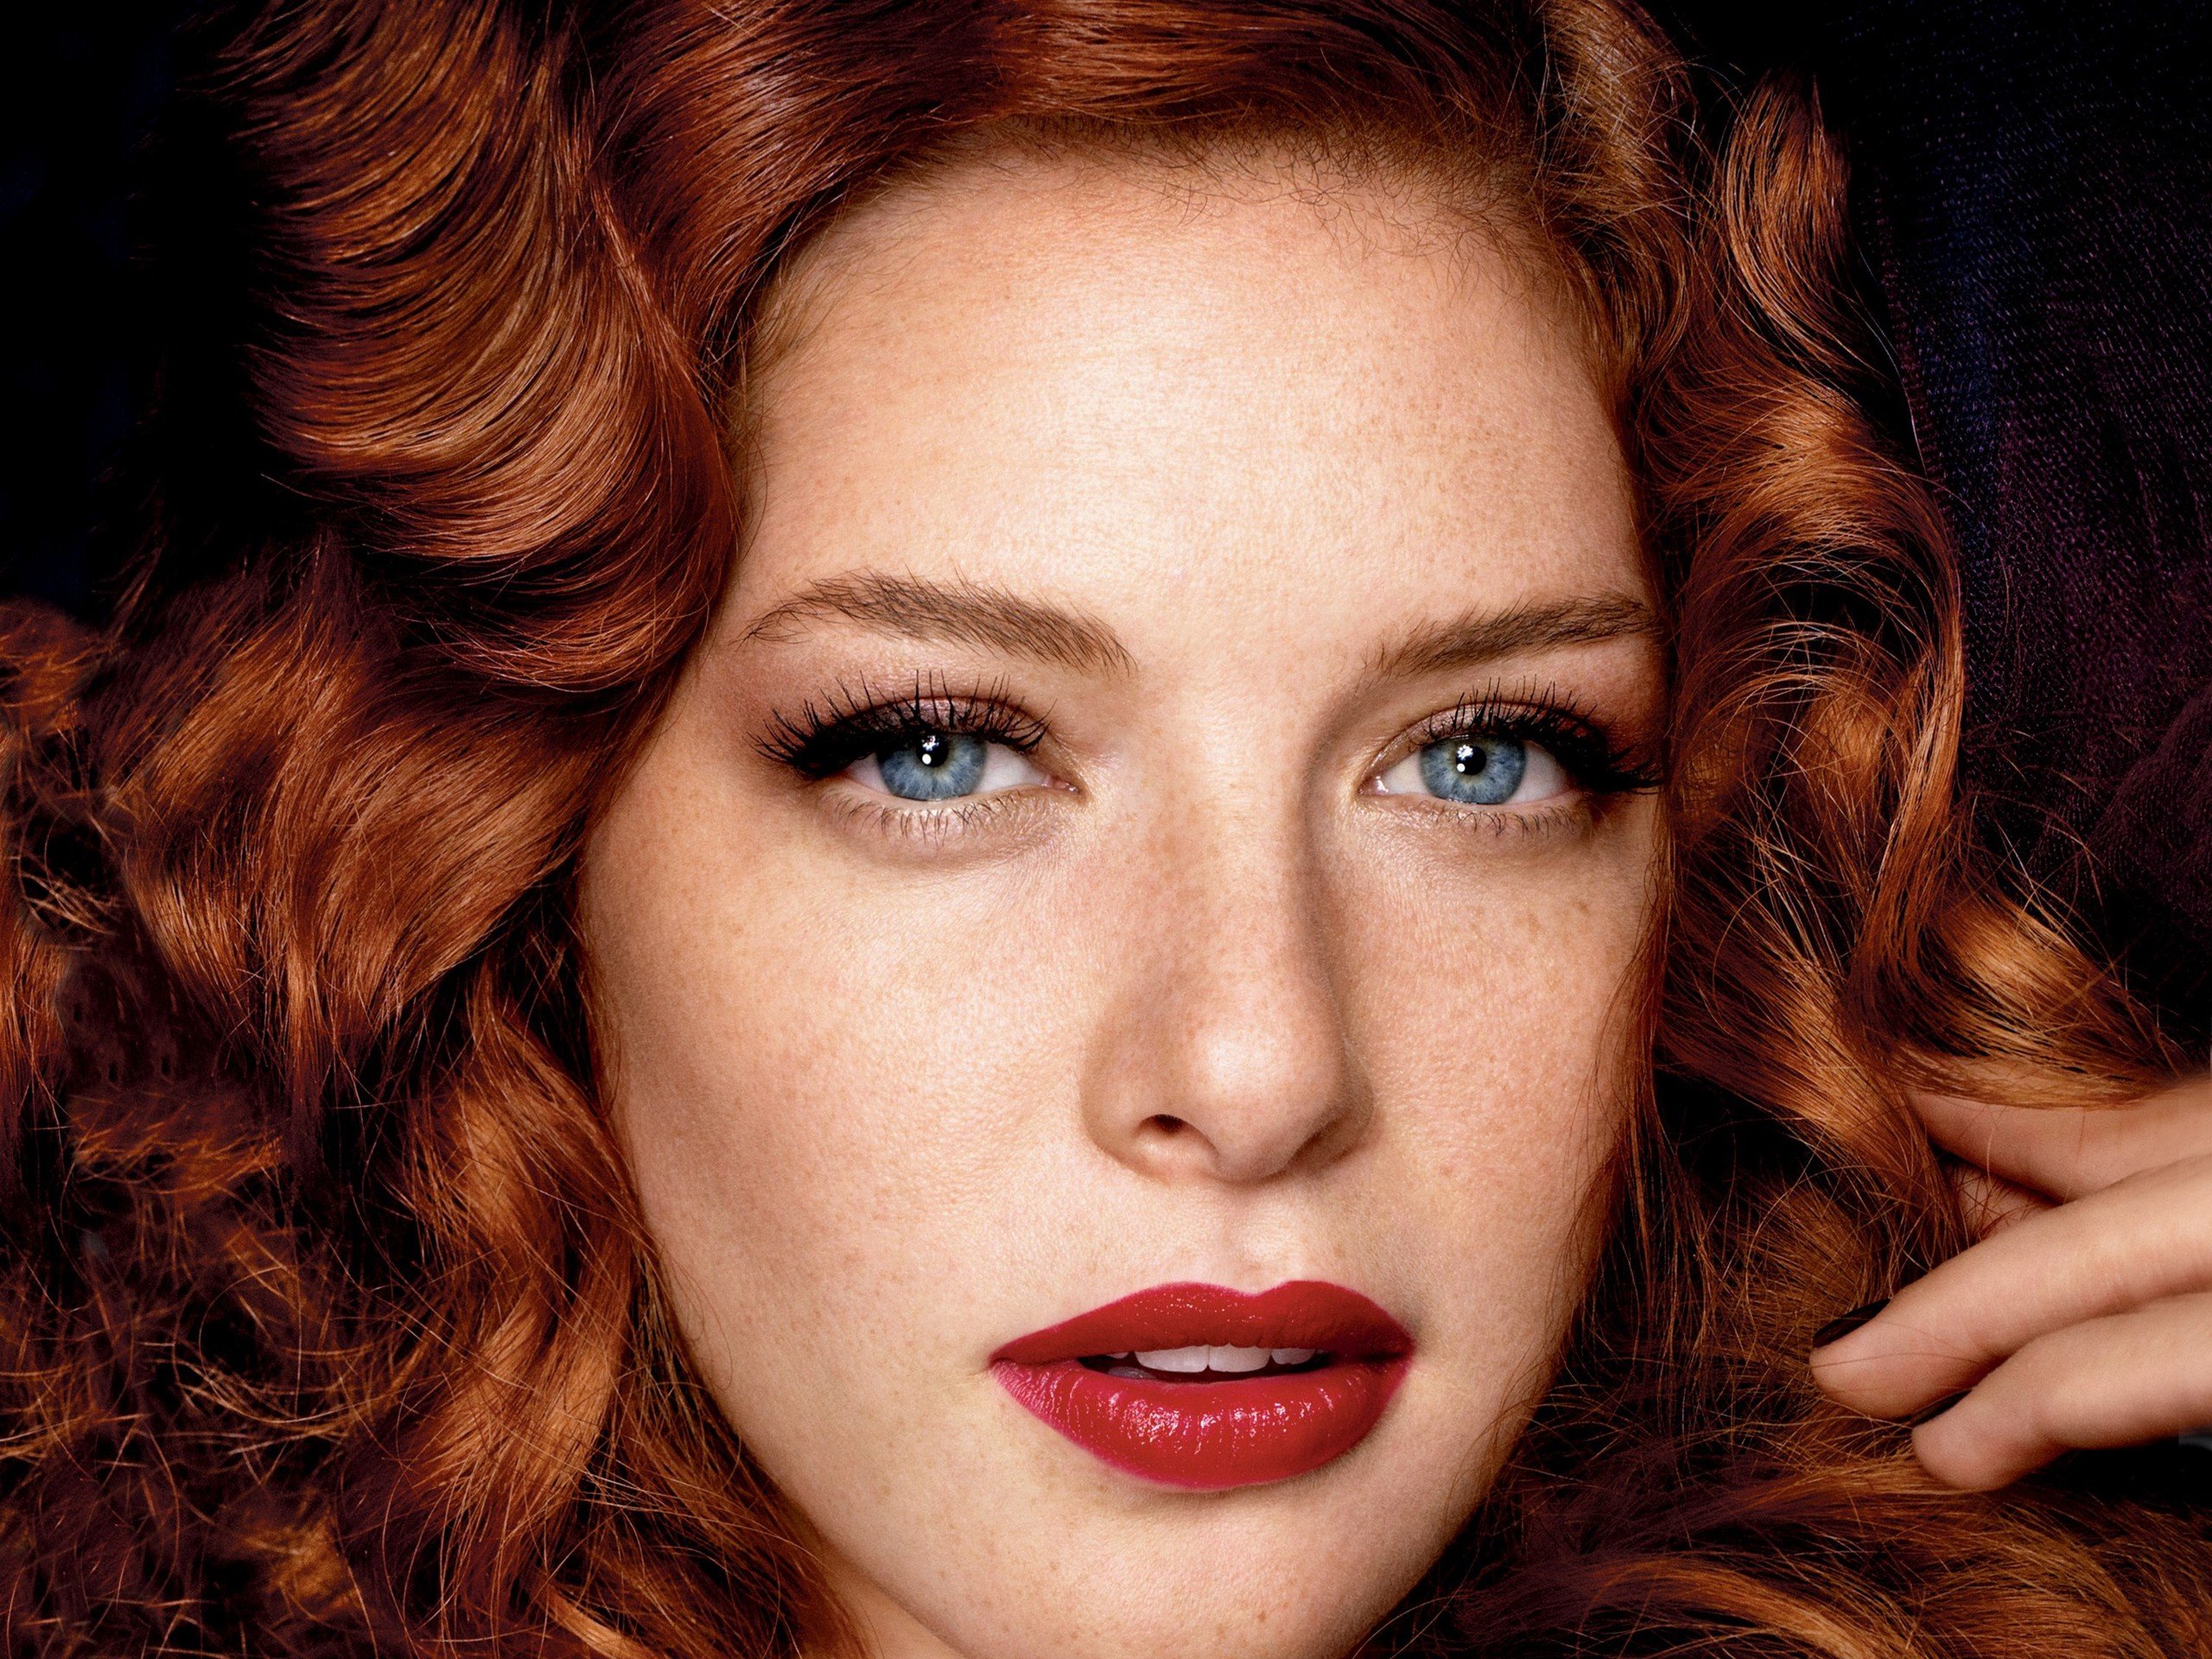 Women Model Redhead Long Hair Face Portrait Blue Eyes Looking At Viewer Open Mouth Rachelle Lefevre Actress Wavy Hair Freckles Red Lipstick Hd Wallpapers Desktop And Mobile Images Photos